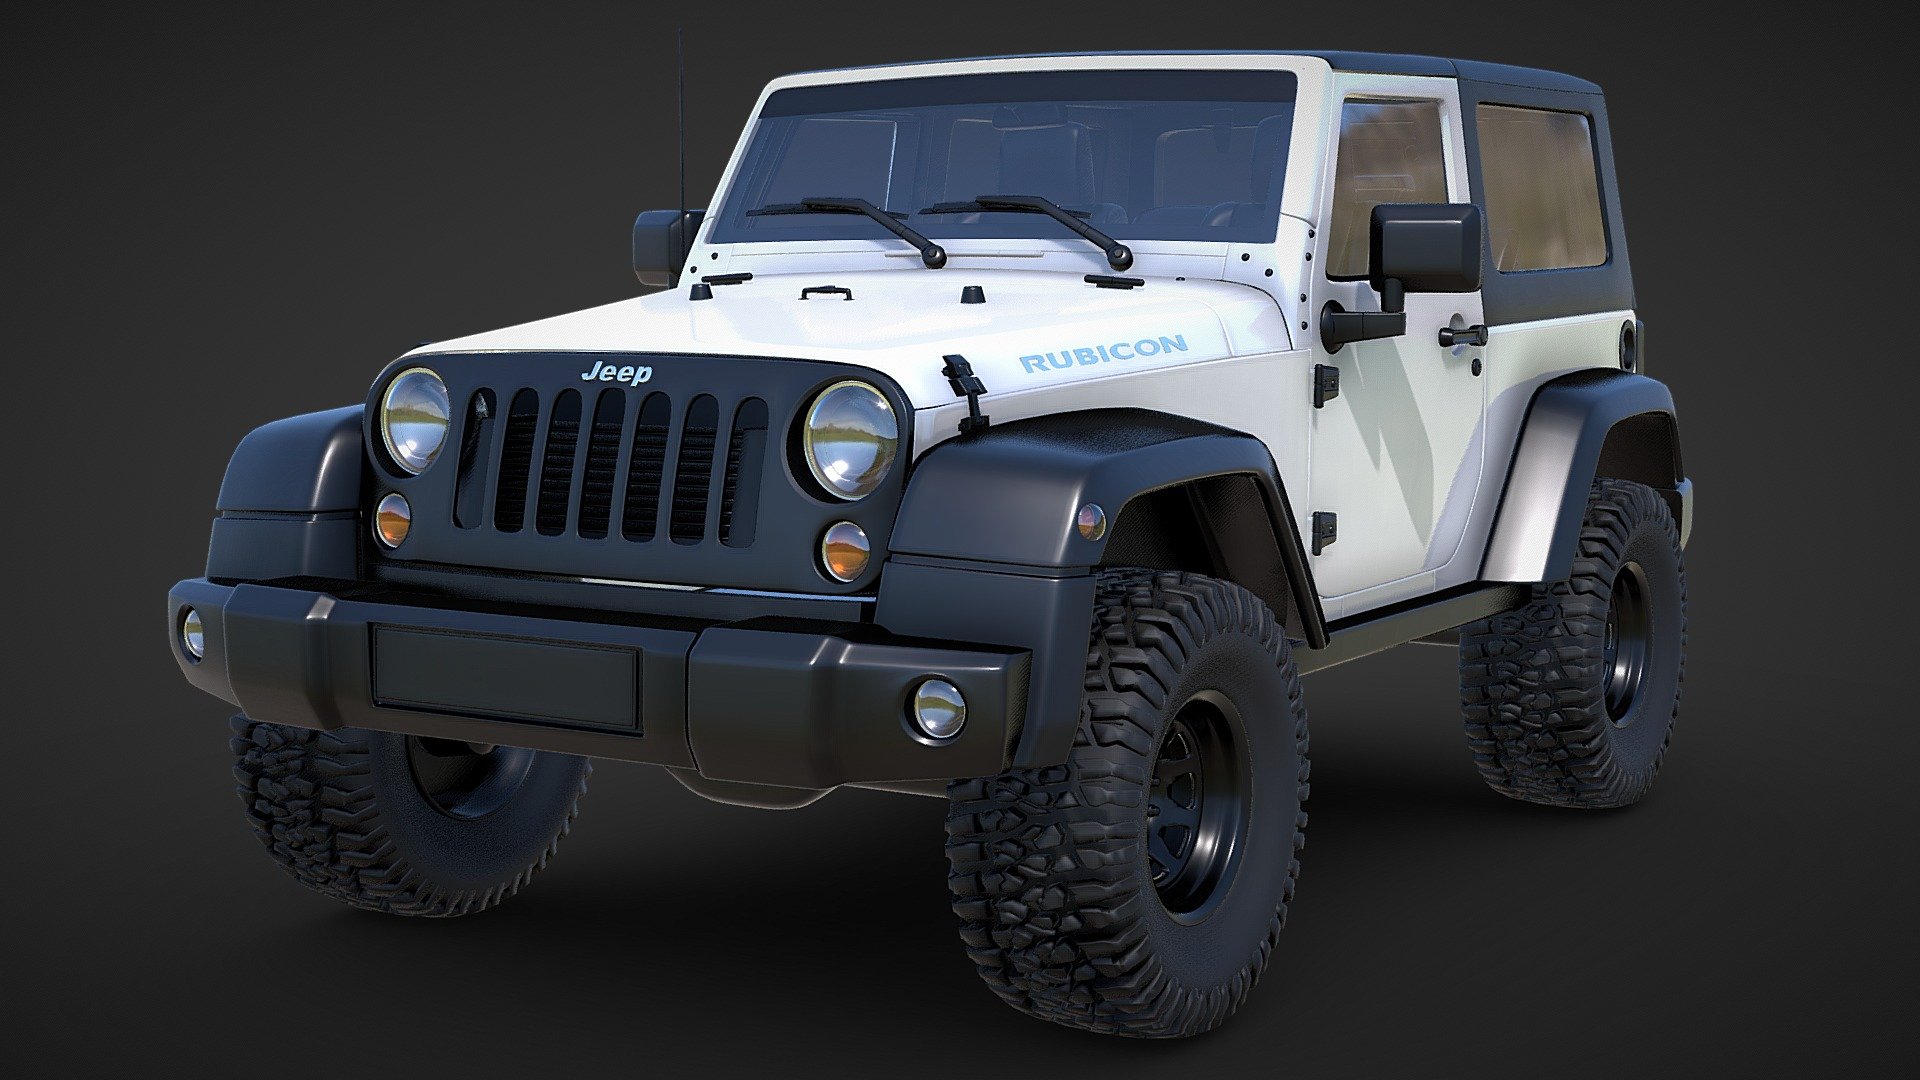 Jeep Wrangler Rubicon 2010 Stock Variation - Jeep Wrangler Rubicon 2010 Stock - Buy Royalty Free 3D model by Pitstop 3D (@Pitsop3D) 3d model